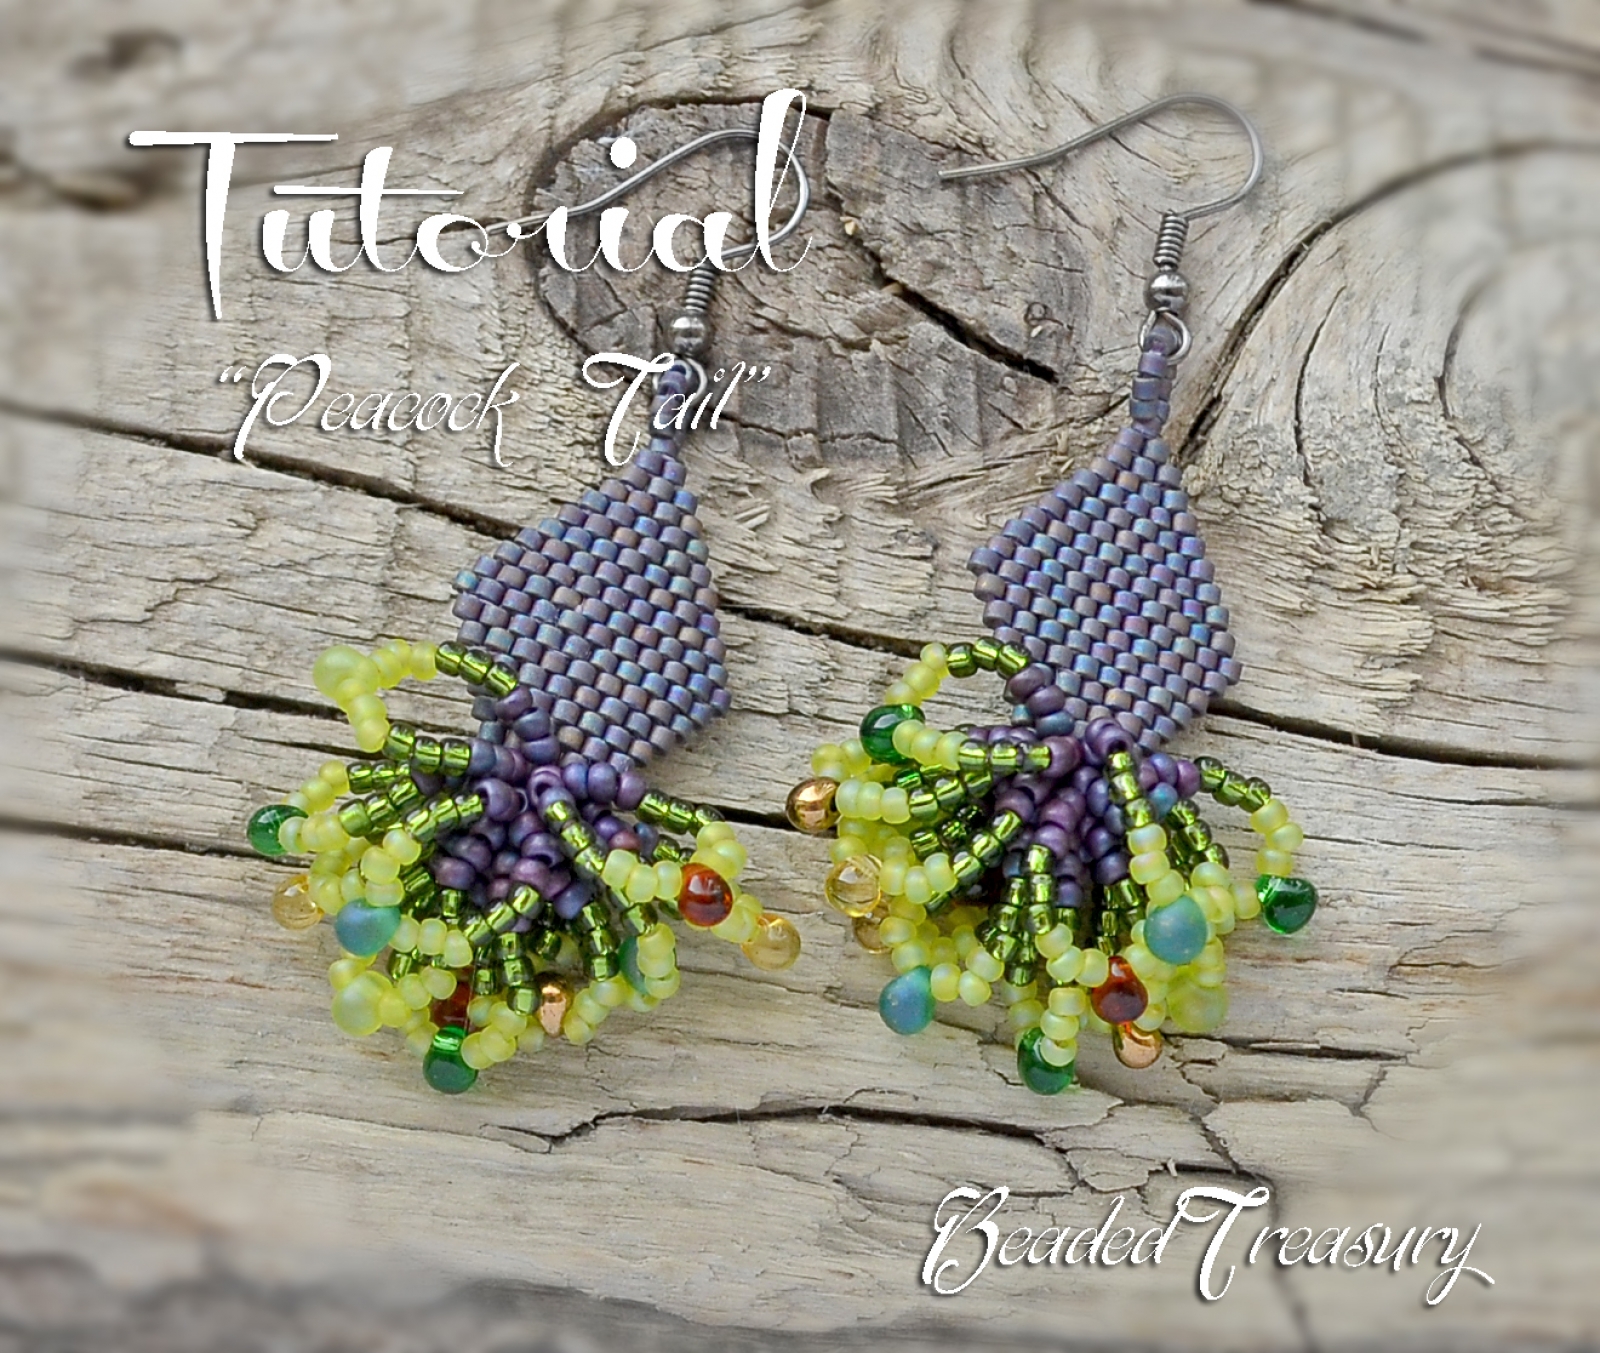 PEACOCK TAIL - seed bead earrings tutorial with Delica beads, seed beads  and fringe beads / Beading tutorial / Seed bead pattern / TUTORIAL ONLY